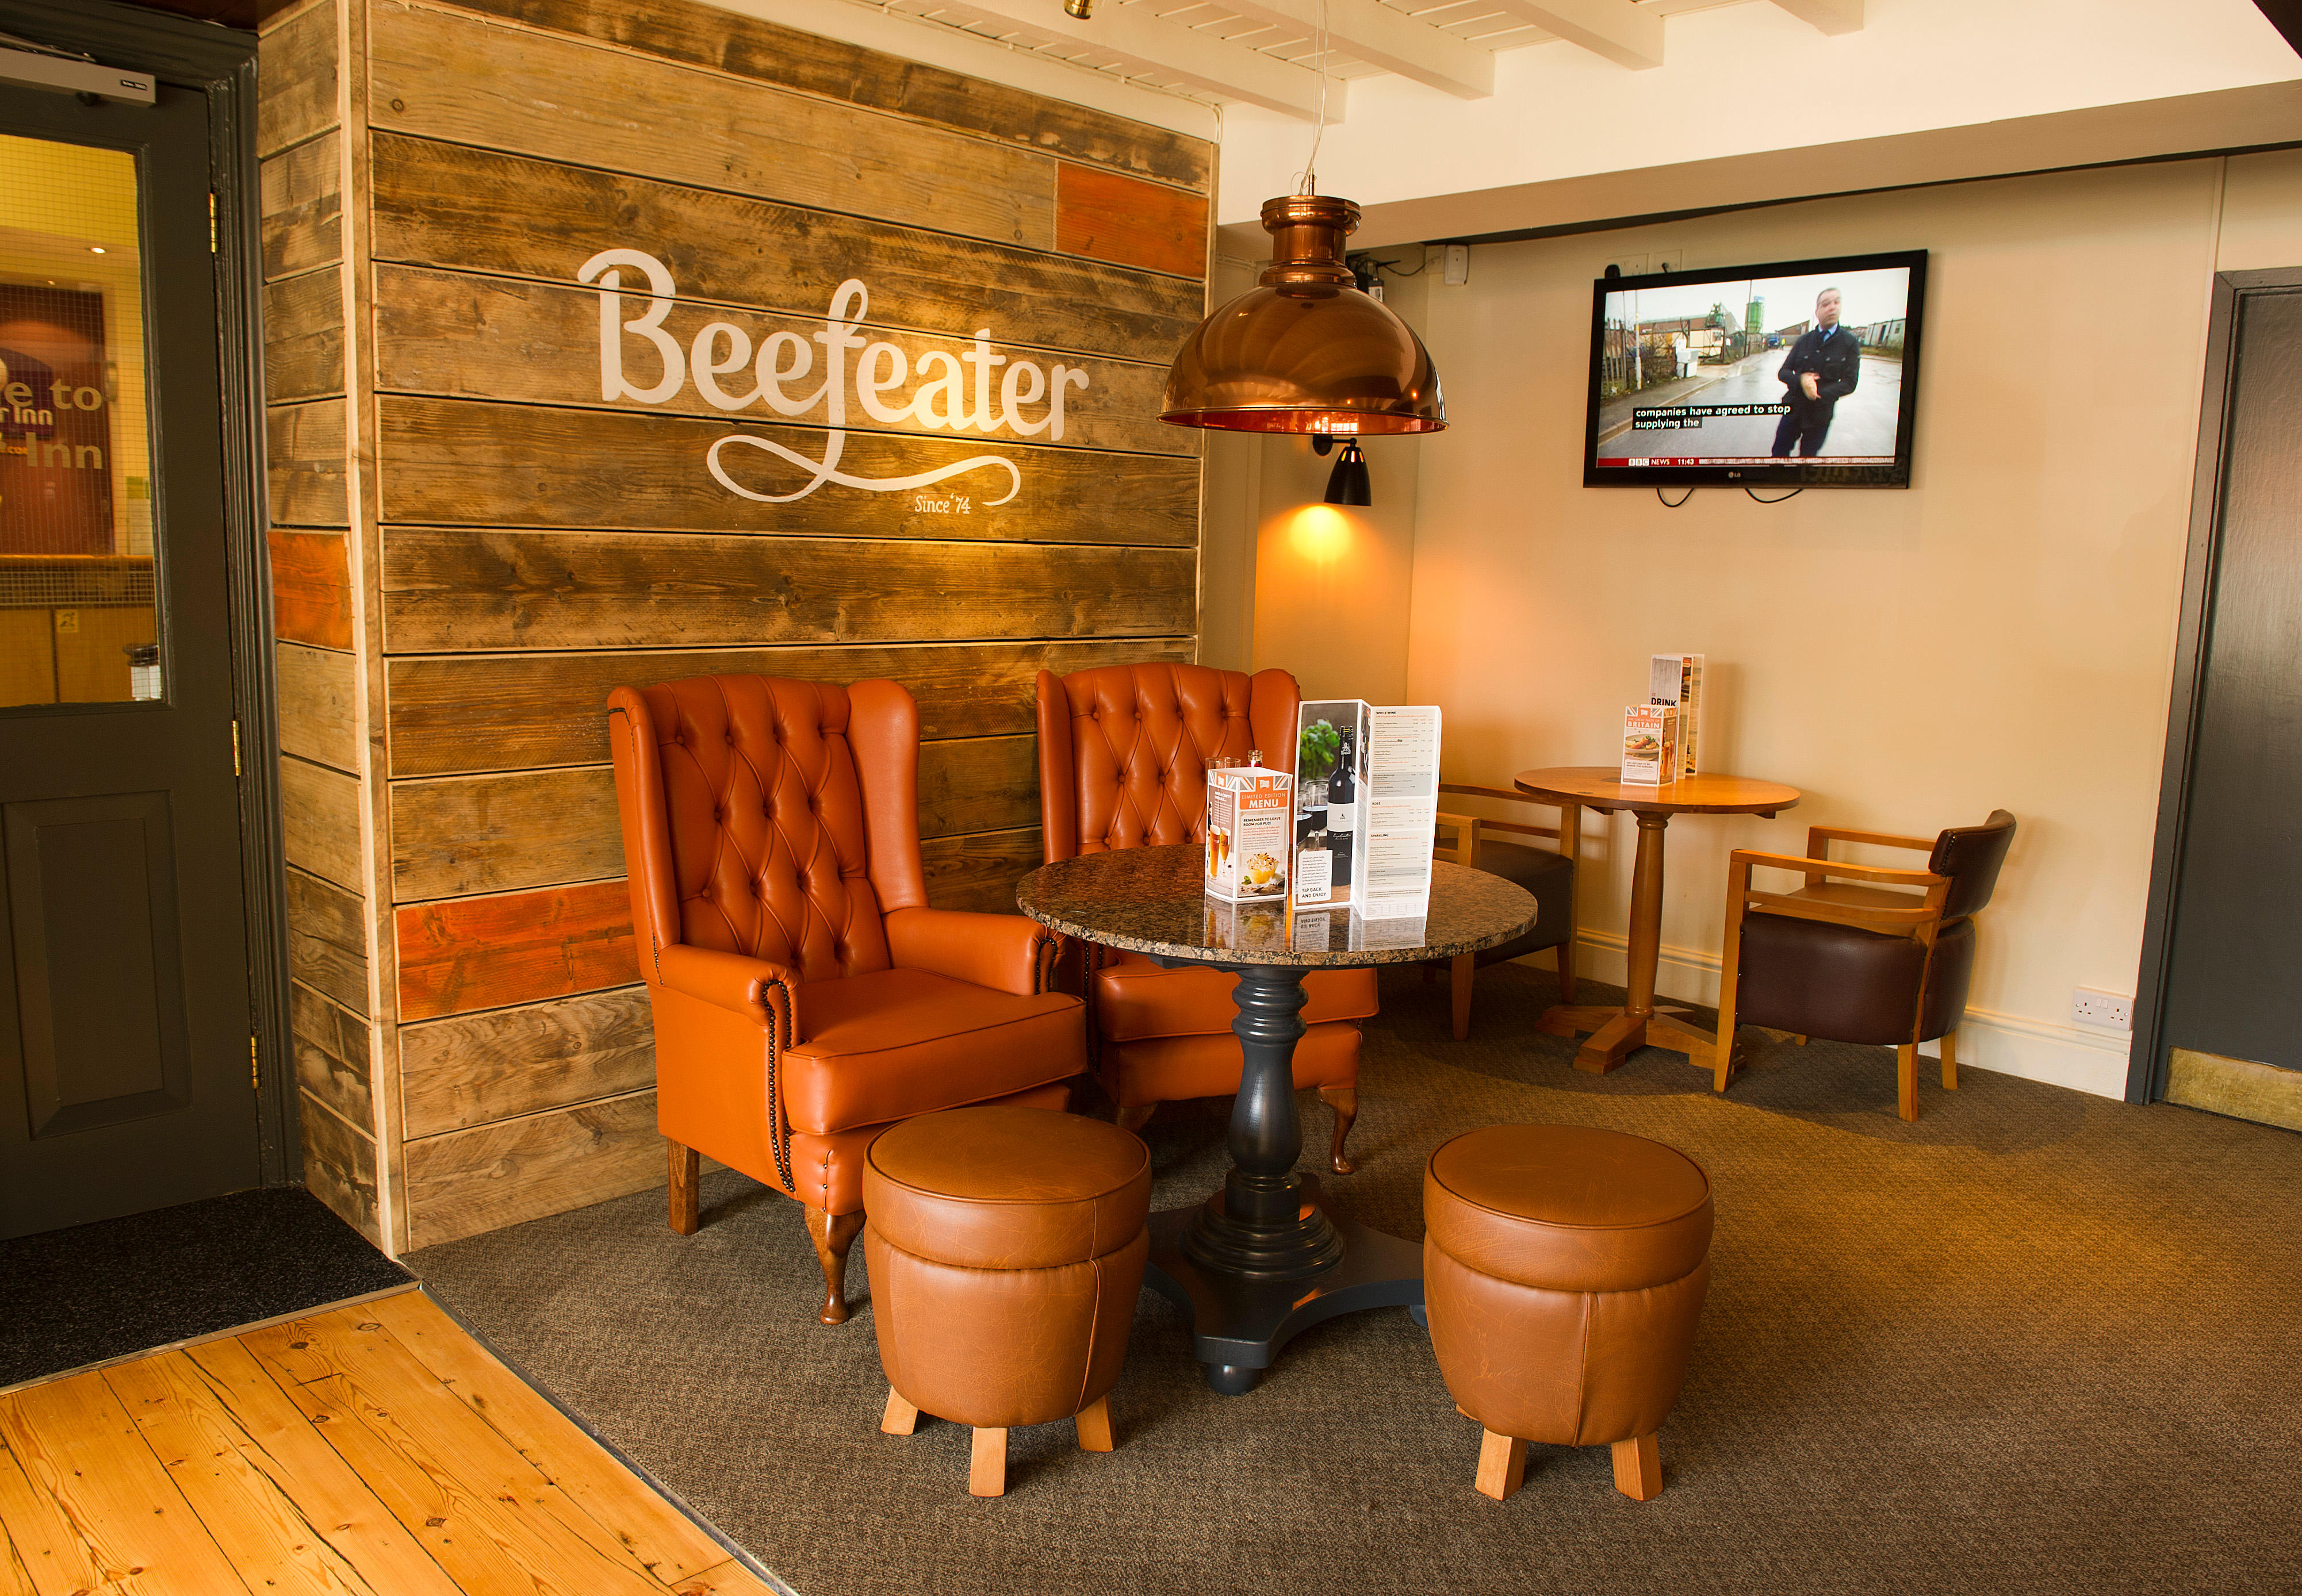 Images The Manor Inn Beefeater